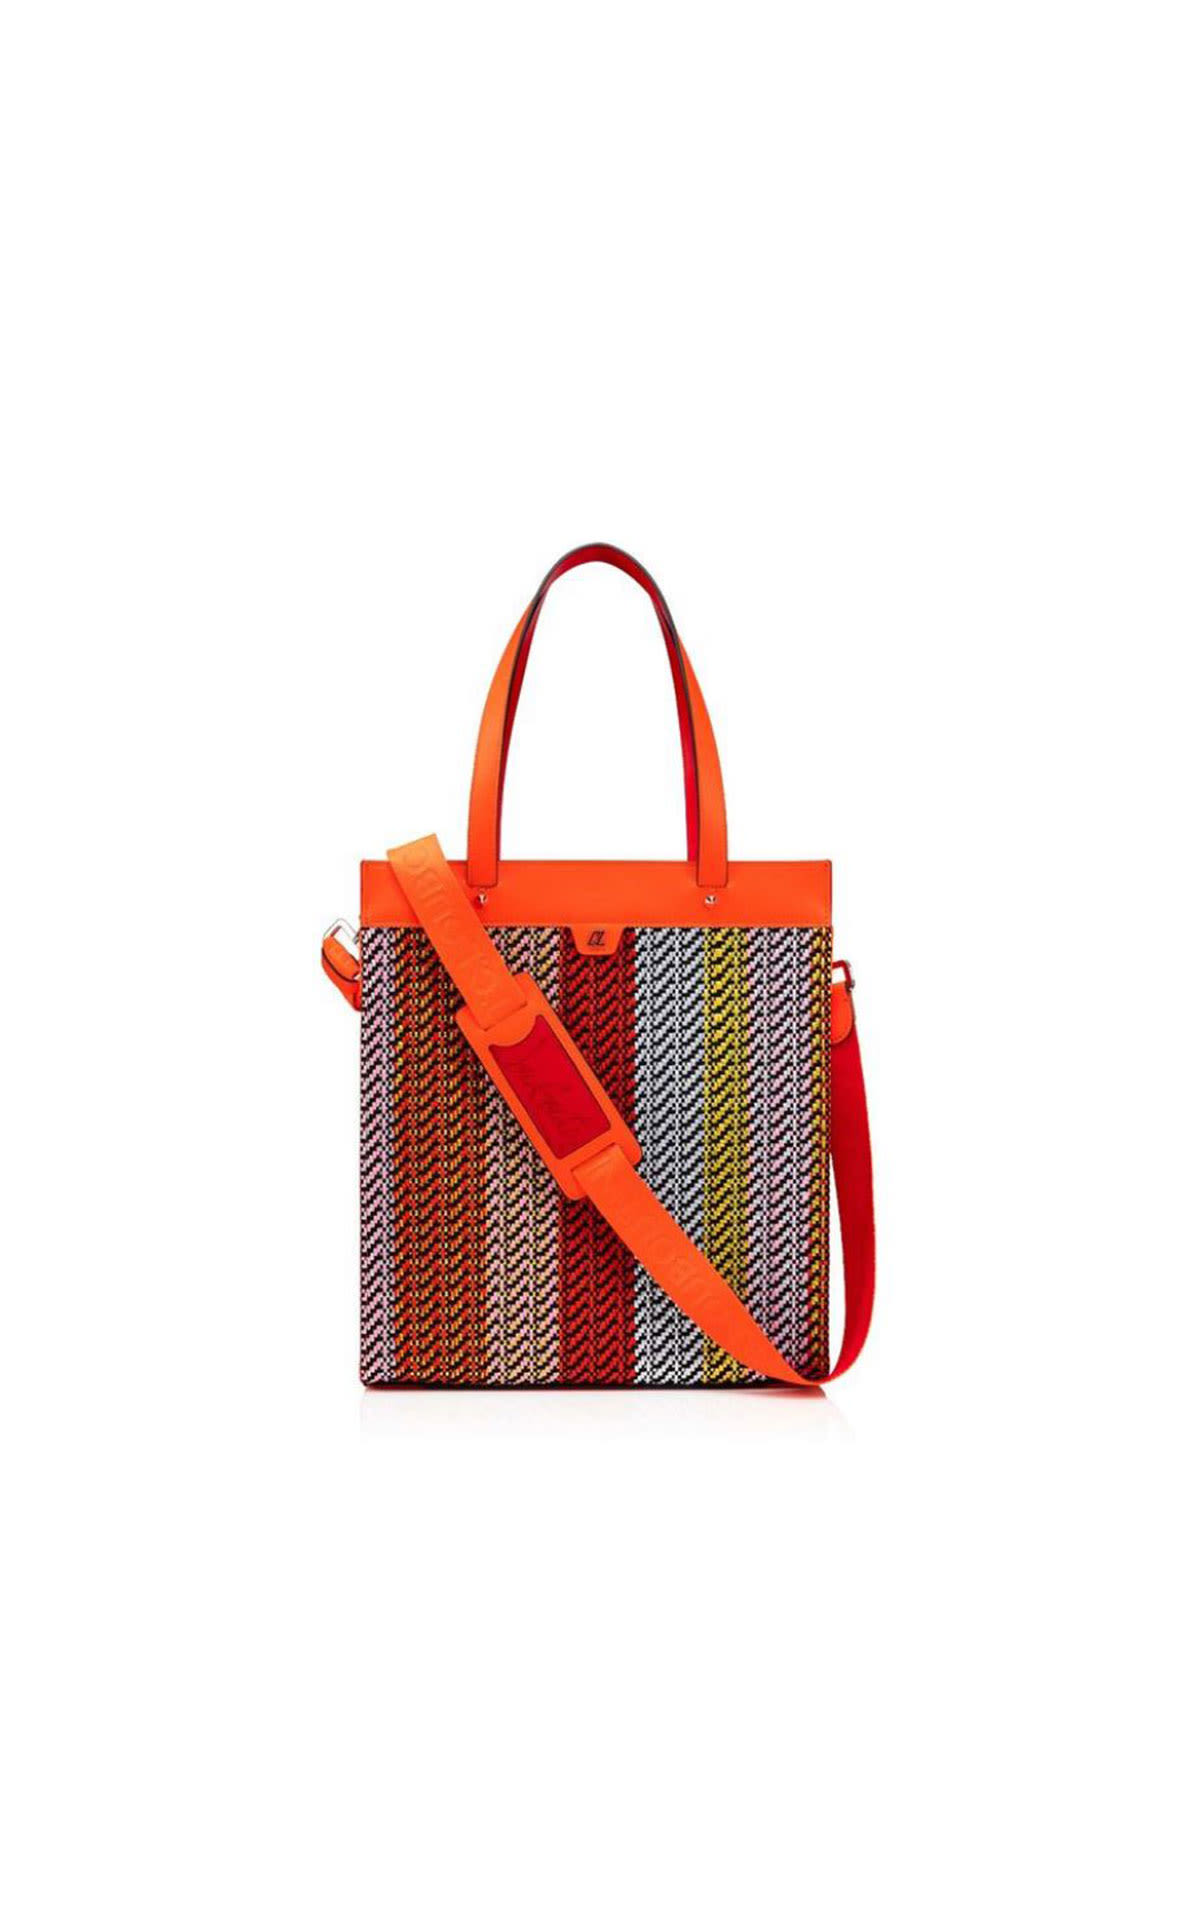 Christian Louboutin Ruis raffia tote from Bicester Village